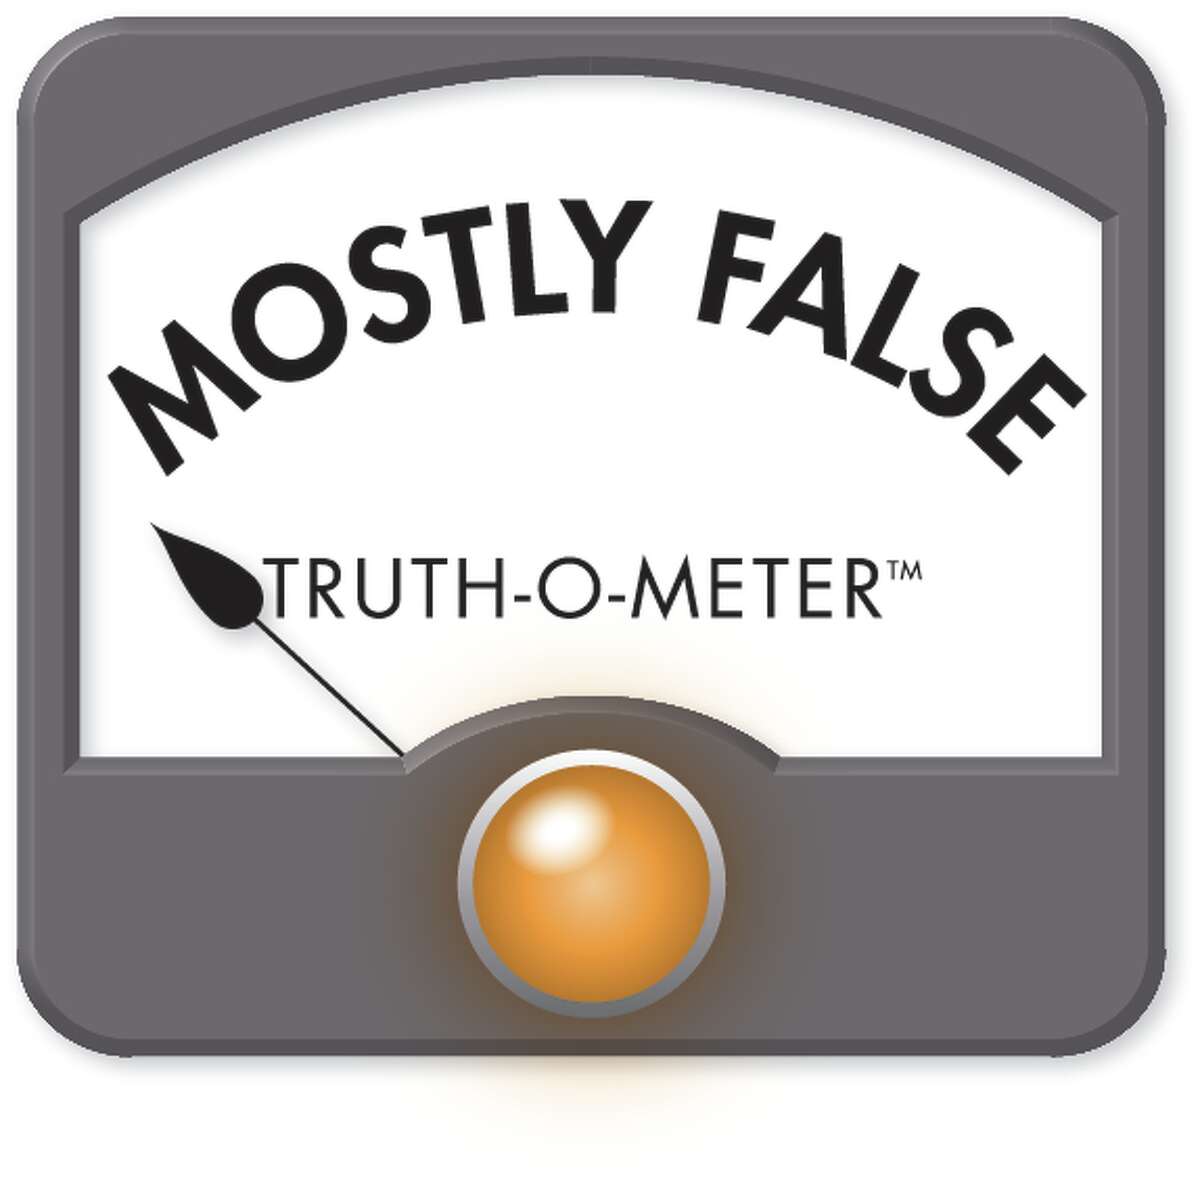 Truth-O-Meter graphic for Politifact stories MOSTLY FALSE